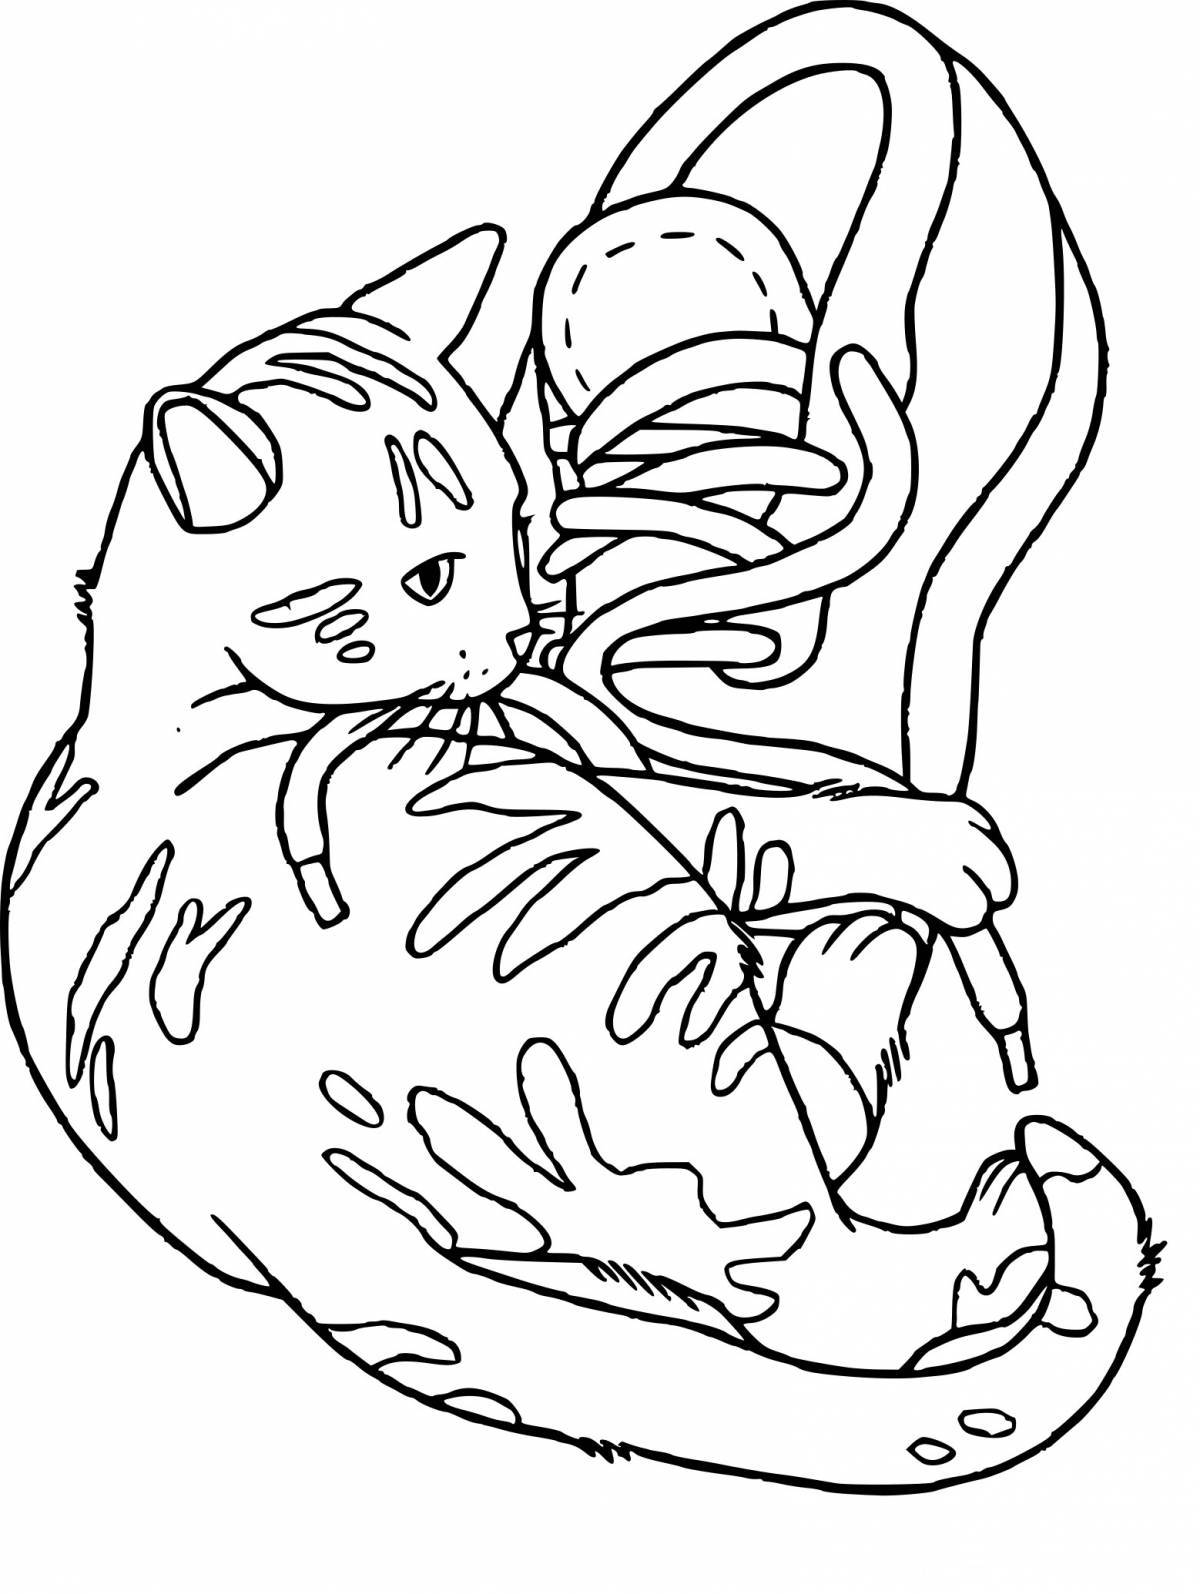 Coloring book for cat girls